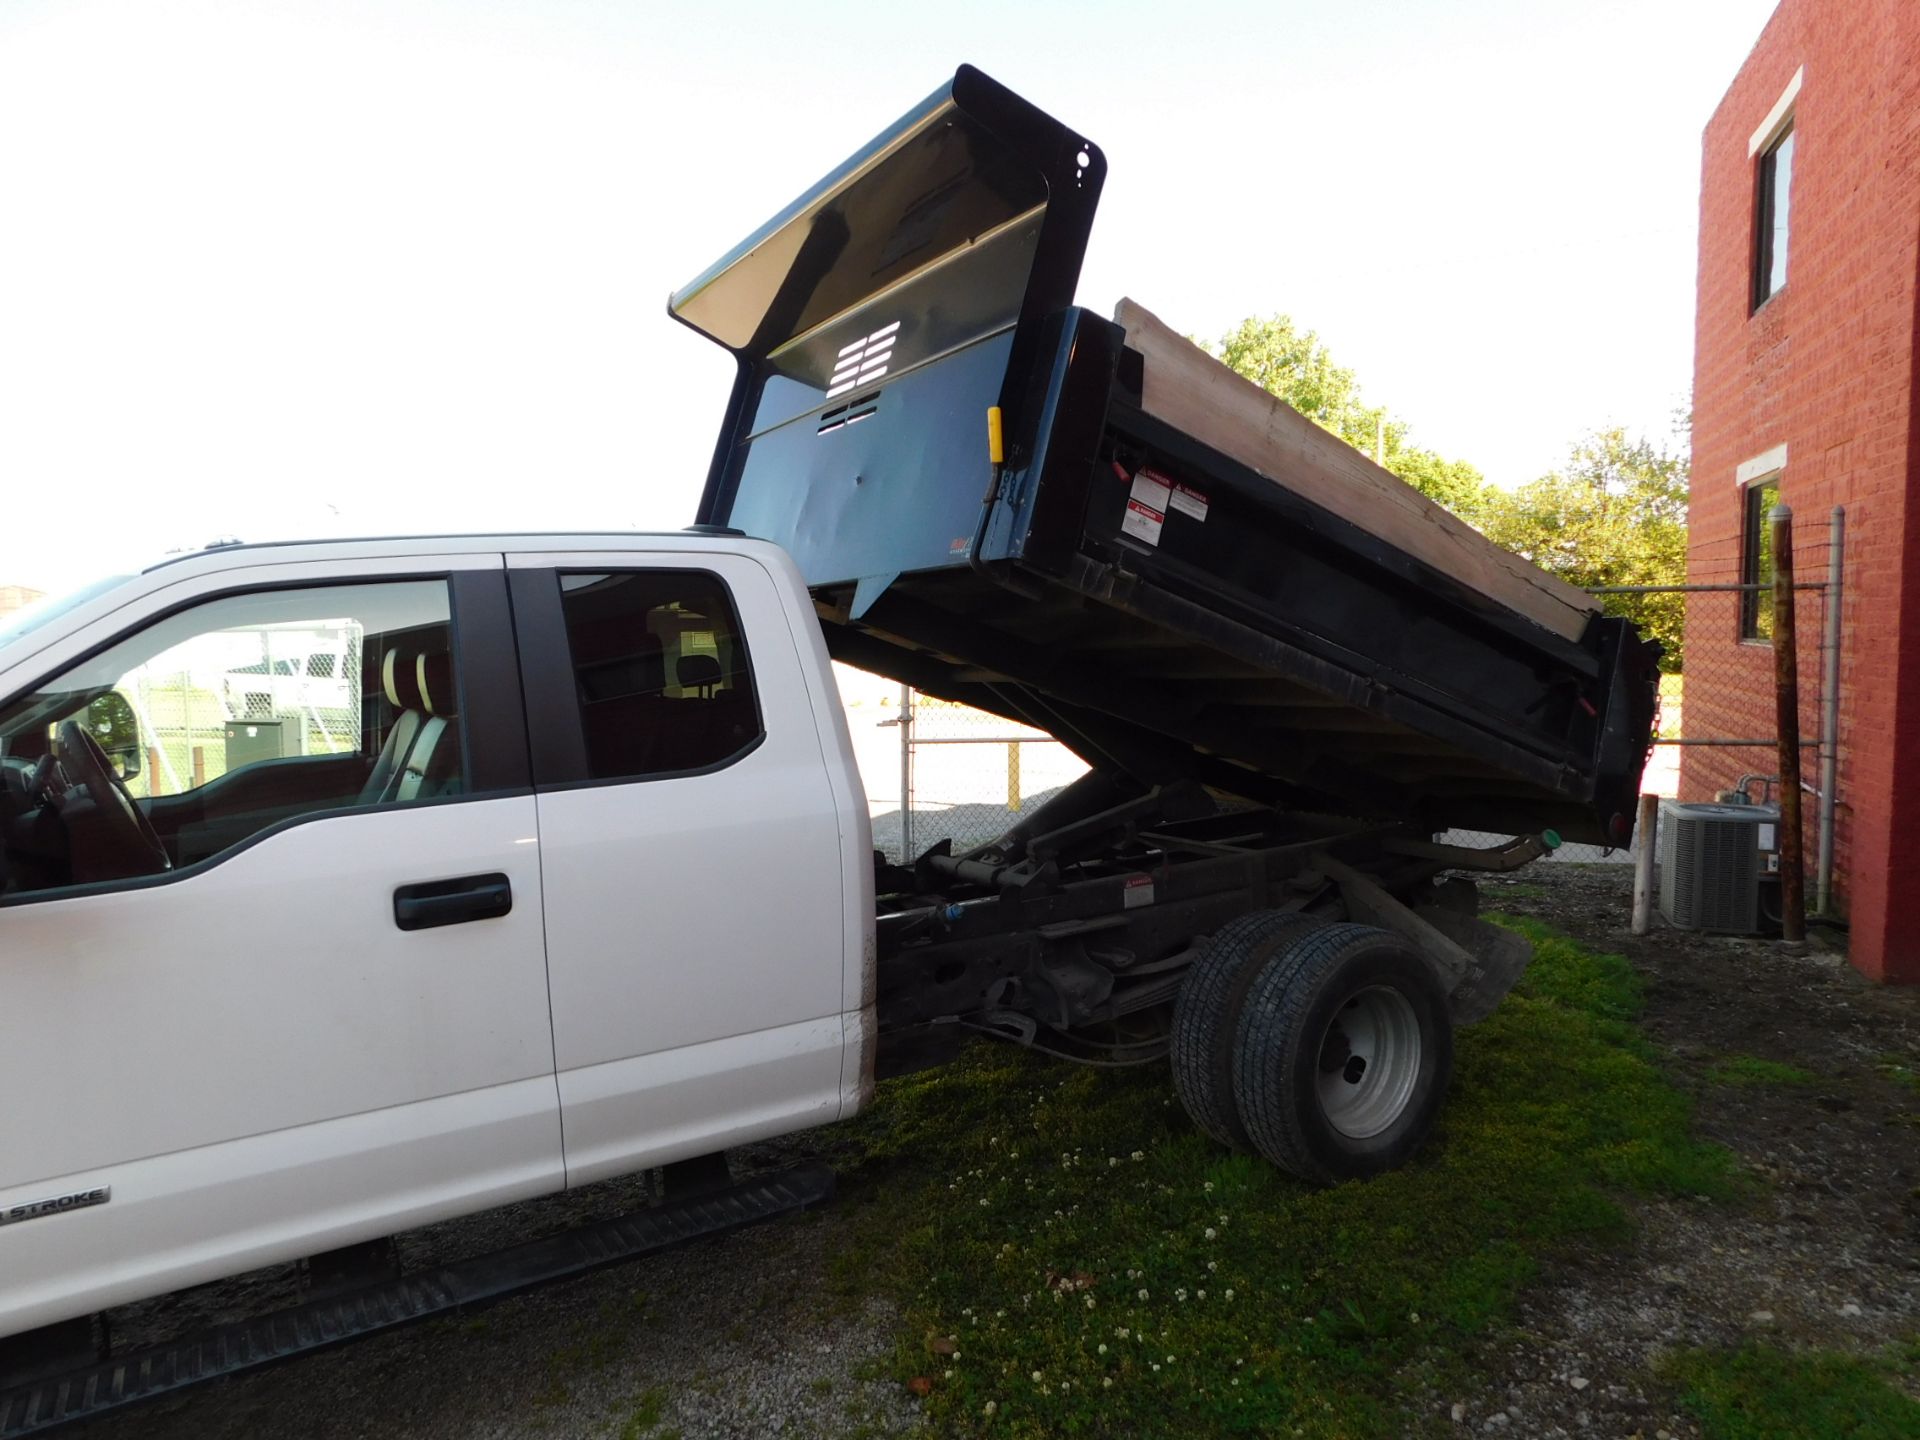 2020 Ford F-350XL Single Axle Dump Truck vin 1FD8X3HT6LEE89344, 6.7 Diesel Engine, Automatic - Image 45 of 56